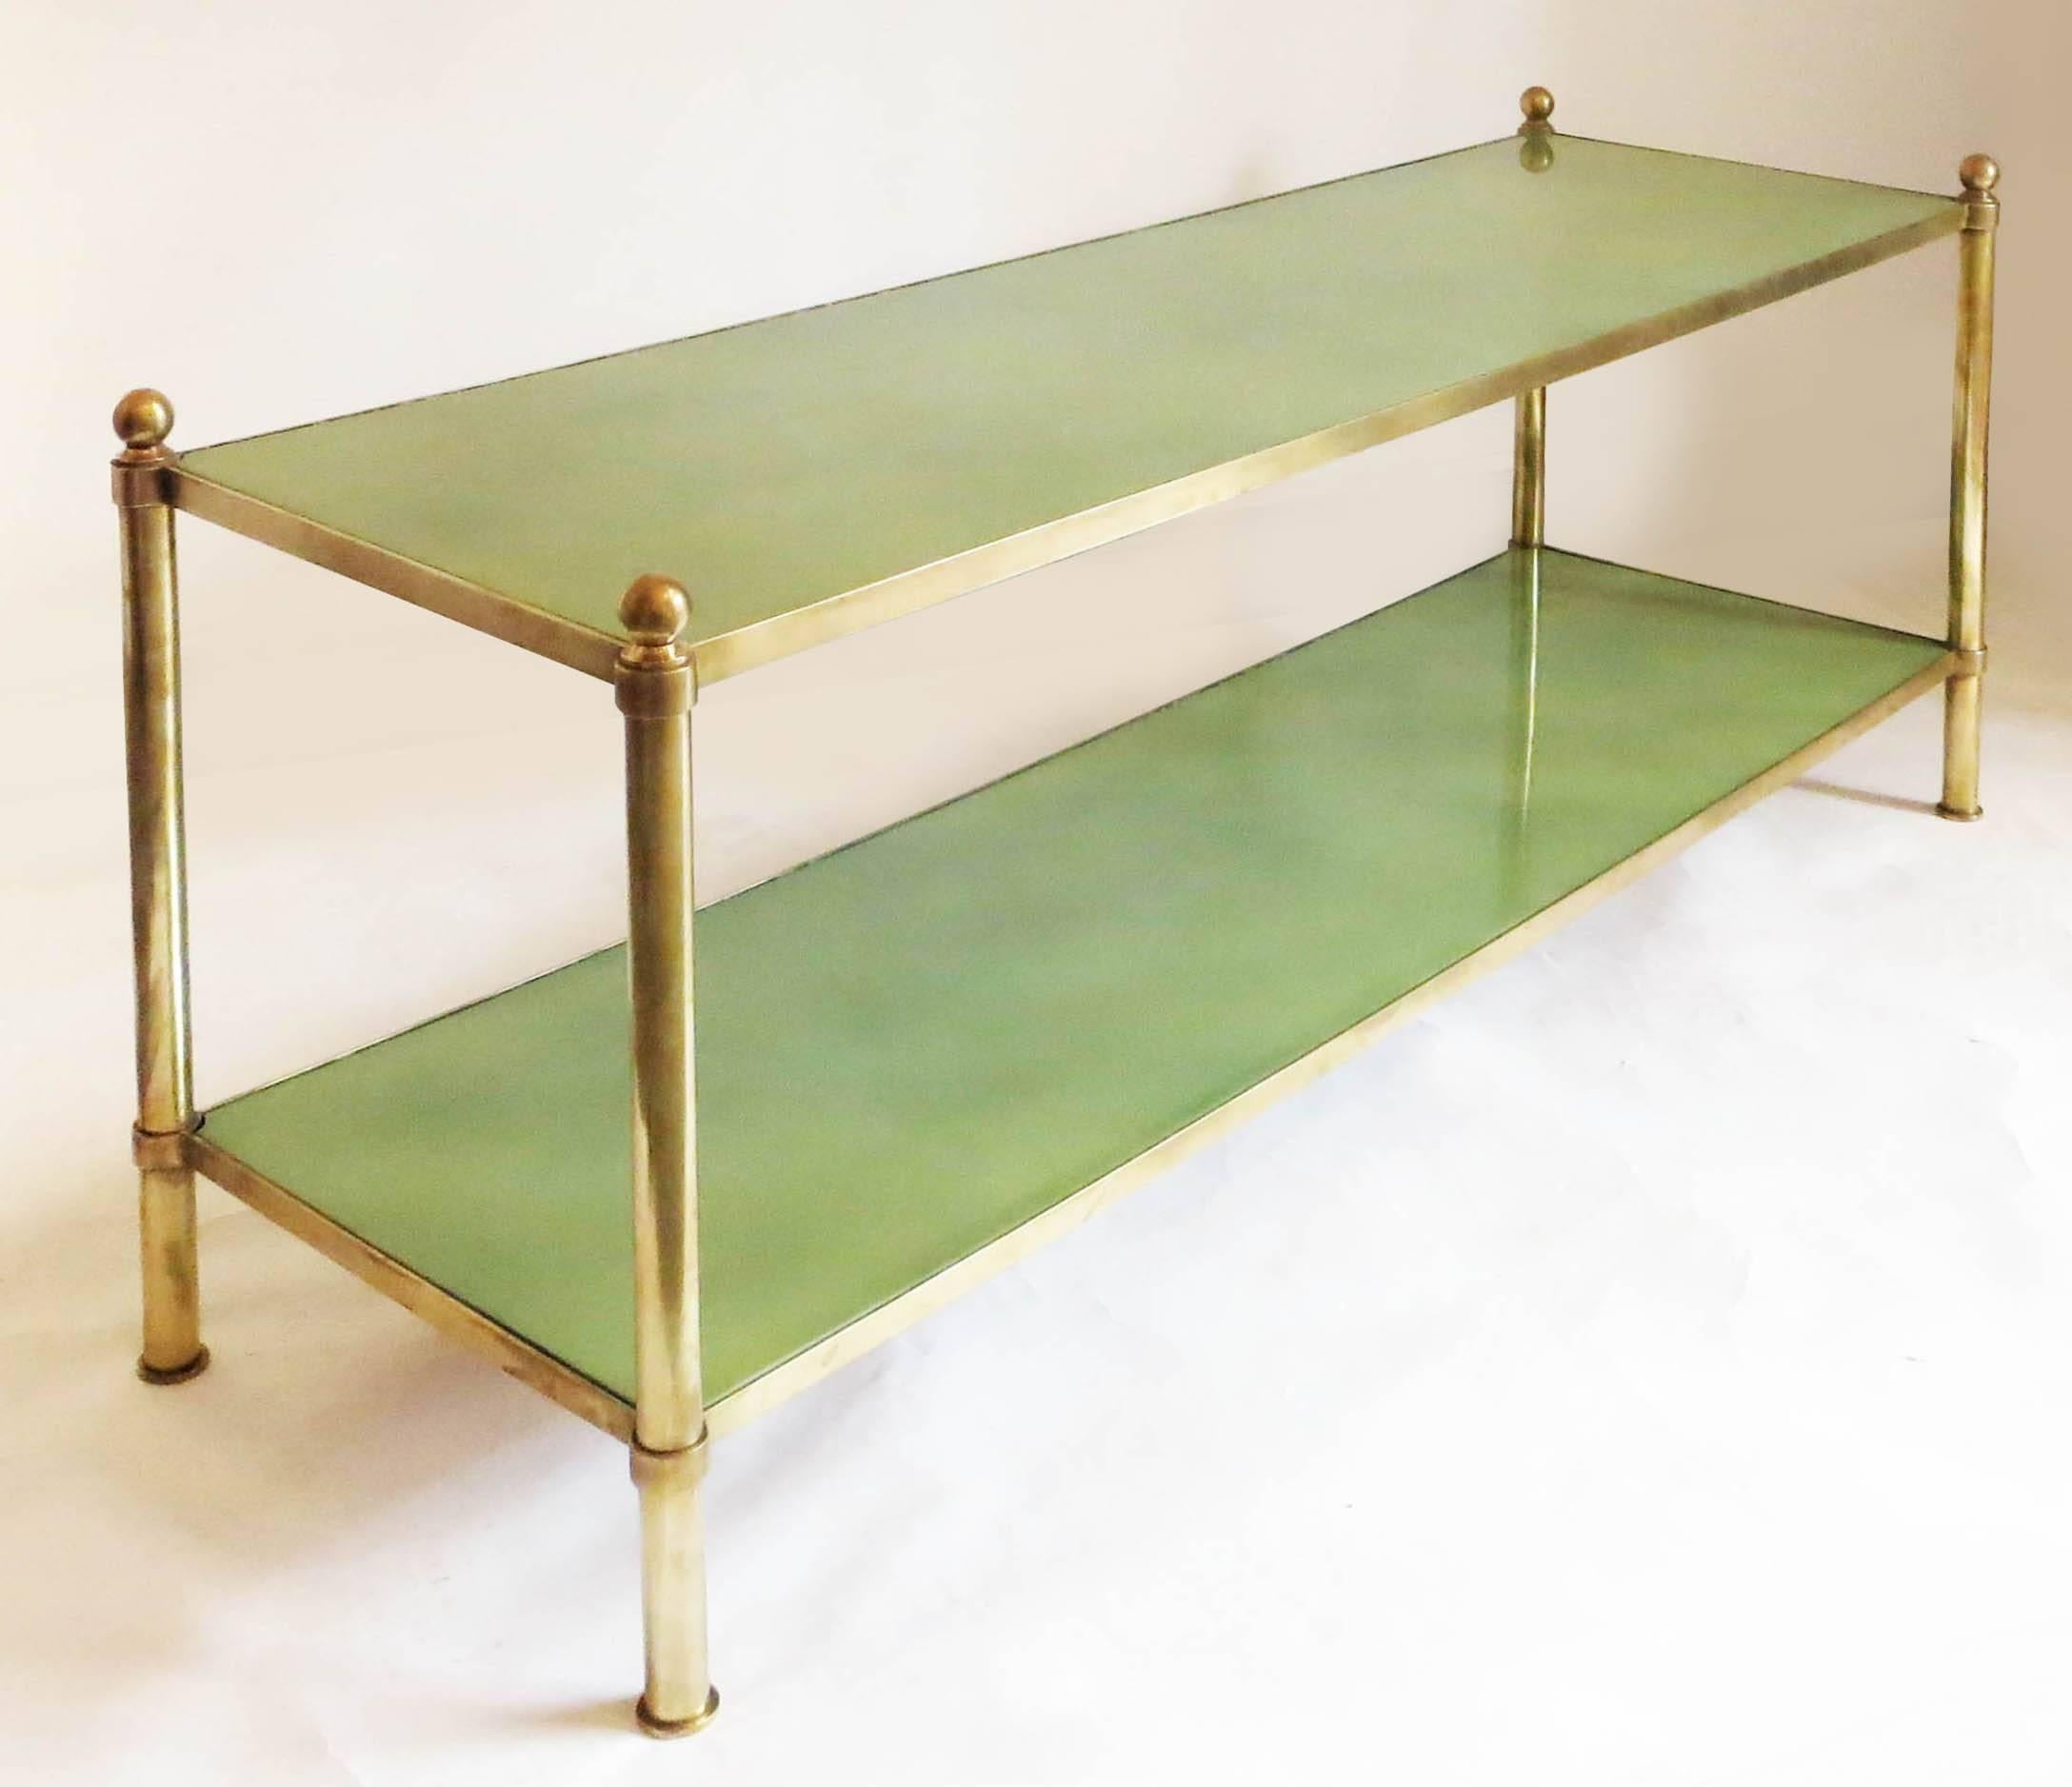 Rare André Arbus coffee table from the 1950s.
Structure in gilded brass with two fantastic green cloudy lacquered tops.